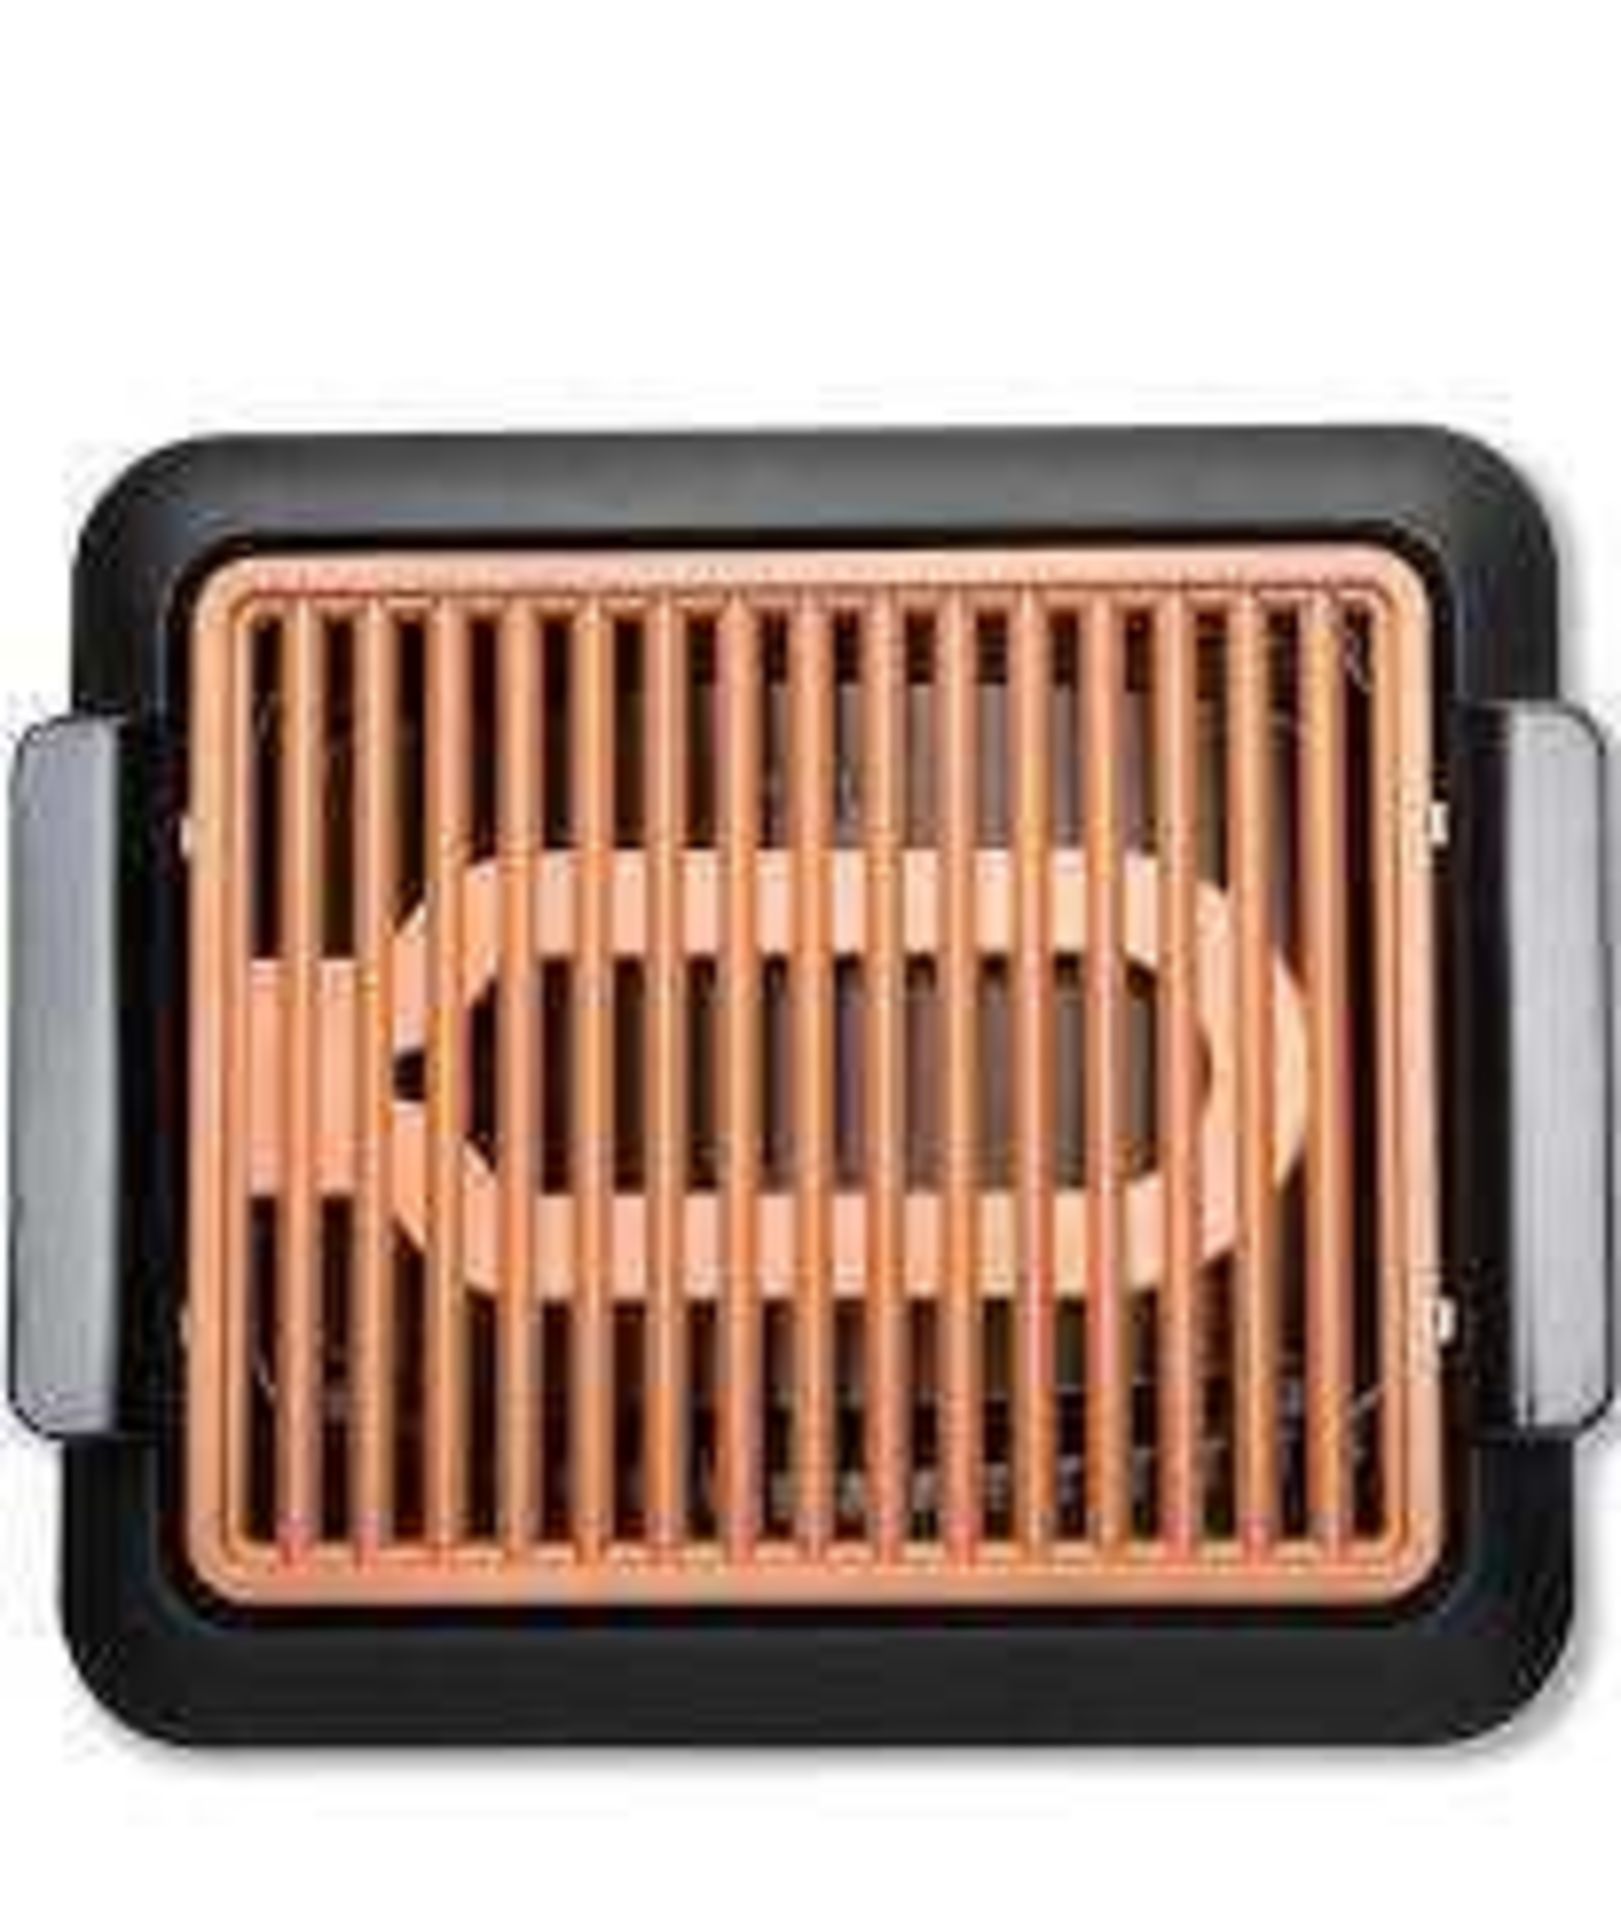 Combined RRP £200 Lot To Contain Four Boxed Gotham Steel Copper Non Stick Grill With Drip Tray